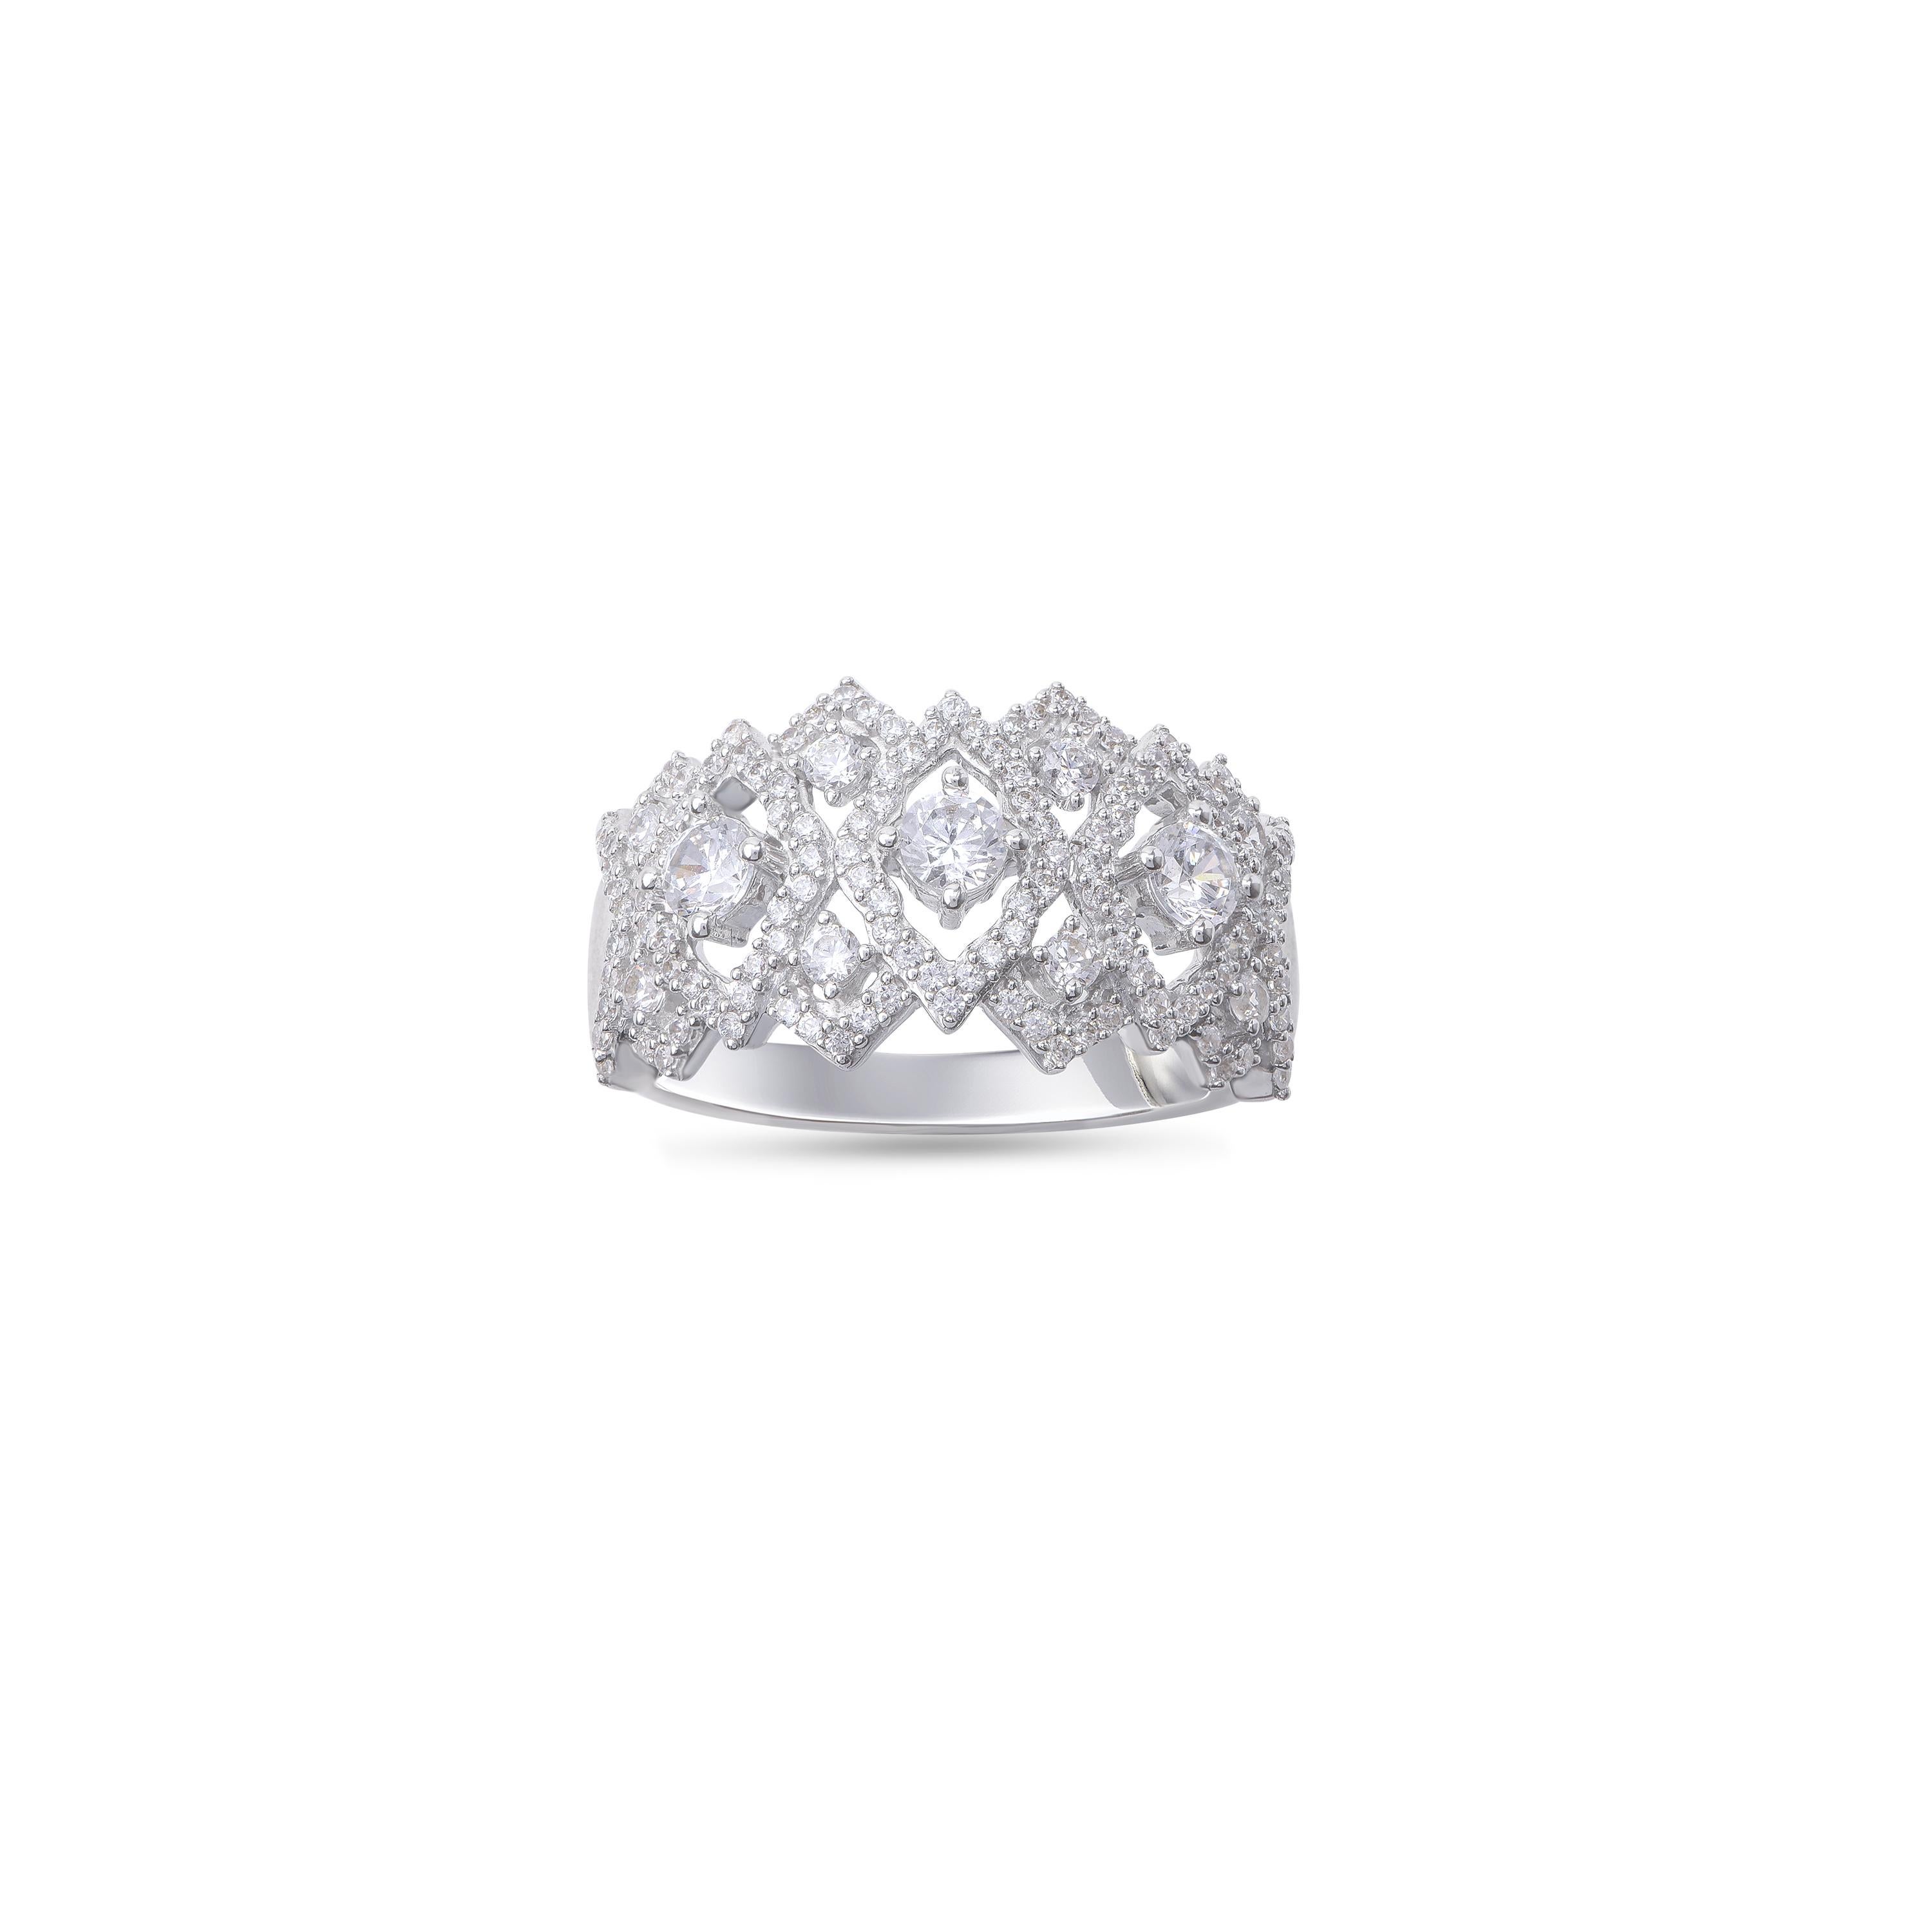 This stunning wedding ring is embedded with 137 brilliant diamonds in prong setting and designed by experts in 18-karat white gold. Diamonds are graded H-I Color, I2 Clarity. 

Metal color and ring size can be customized on request. 

This piece is